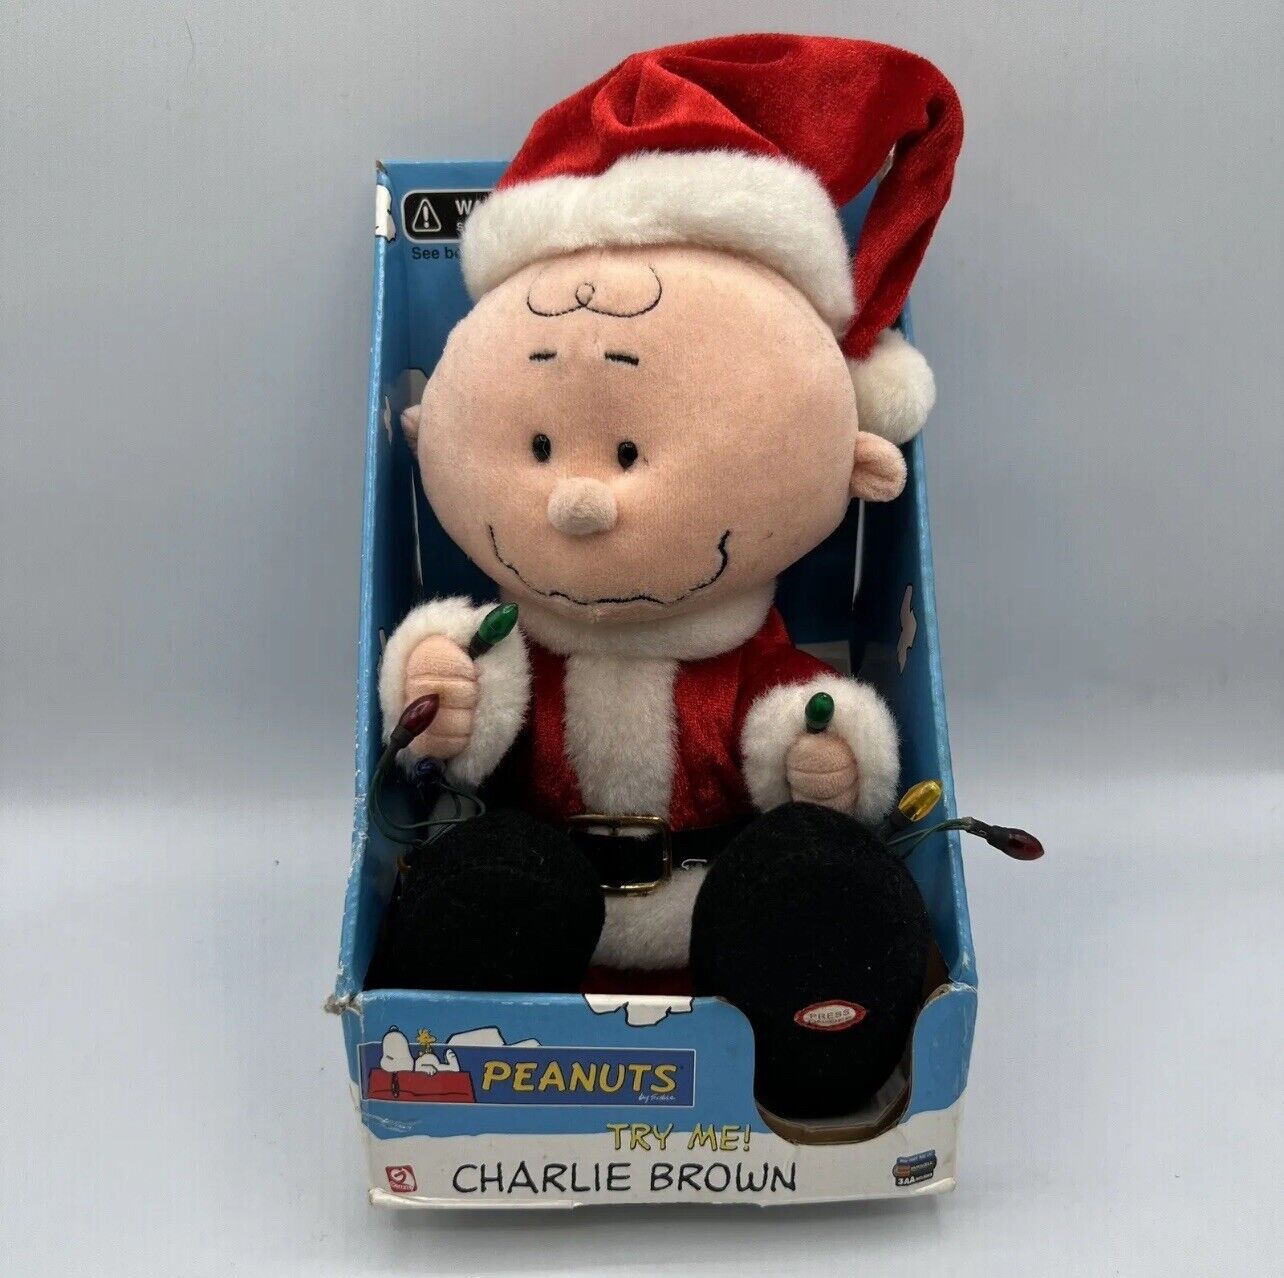 Peanuts Gemmy Industries Charlie Brown Christmas Singing Plush Tested